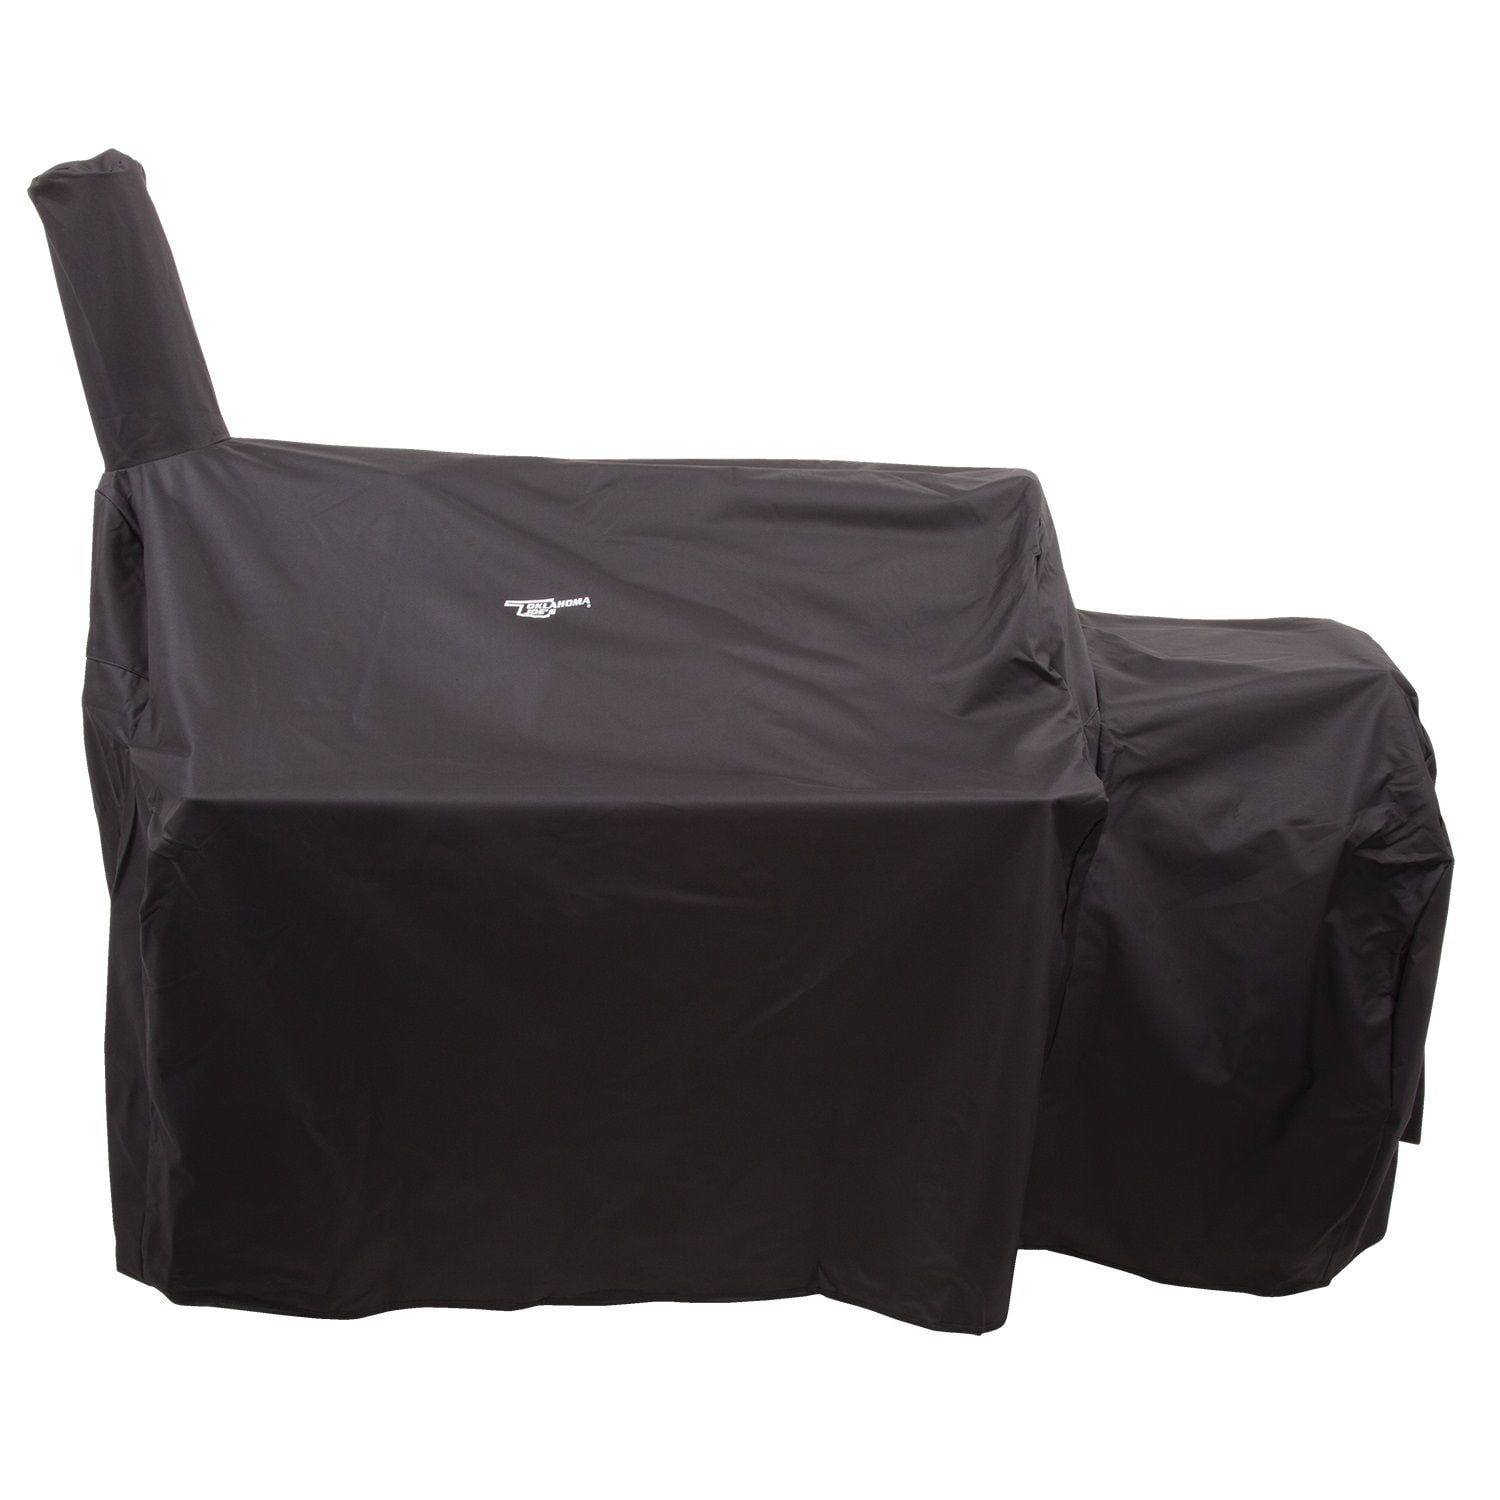 Oklahoma Joe's Longhorn Weather Resistant Outdoor Grill Smoker Combo Cover